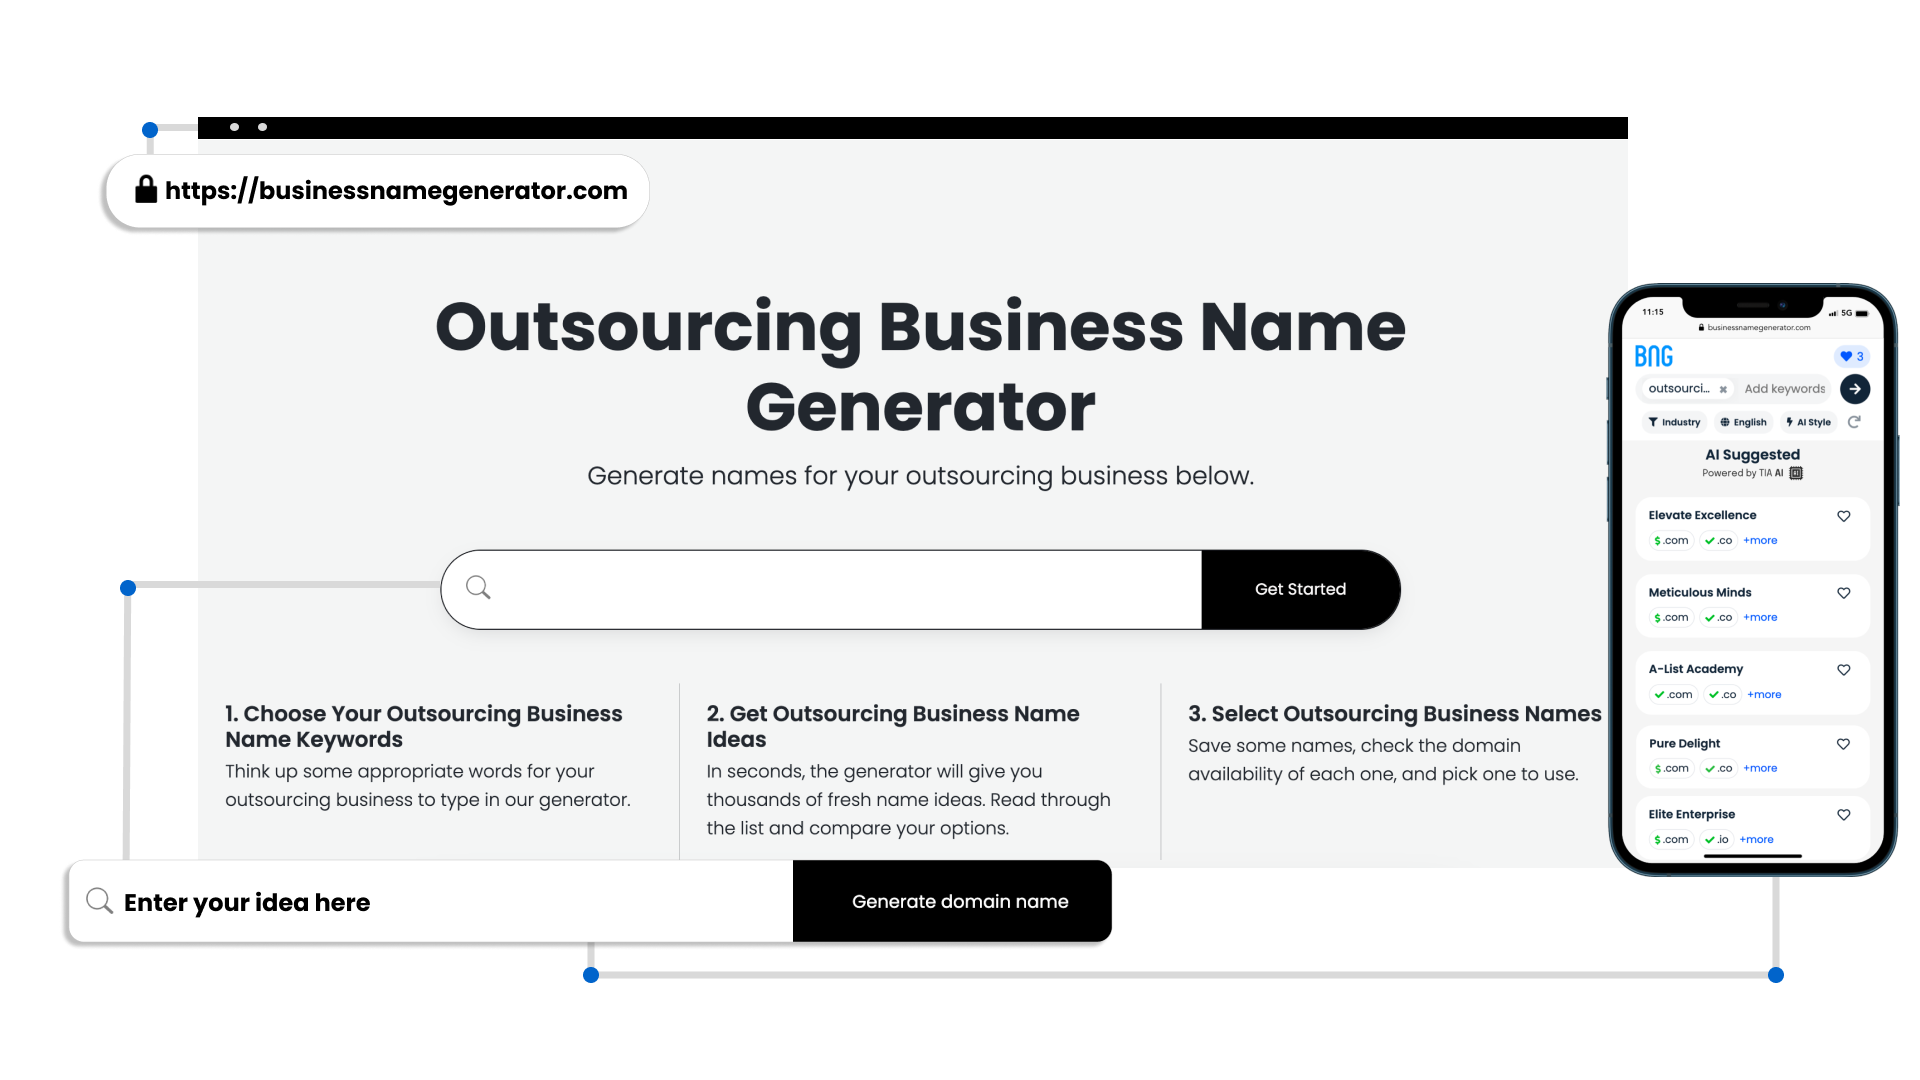 Benefits of Our Outsourcing Business Name Generator